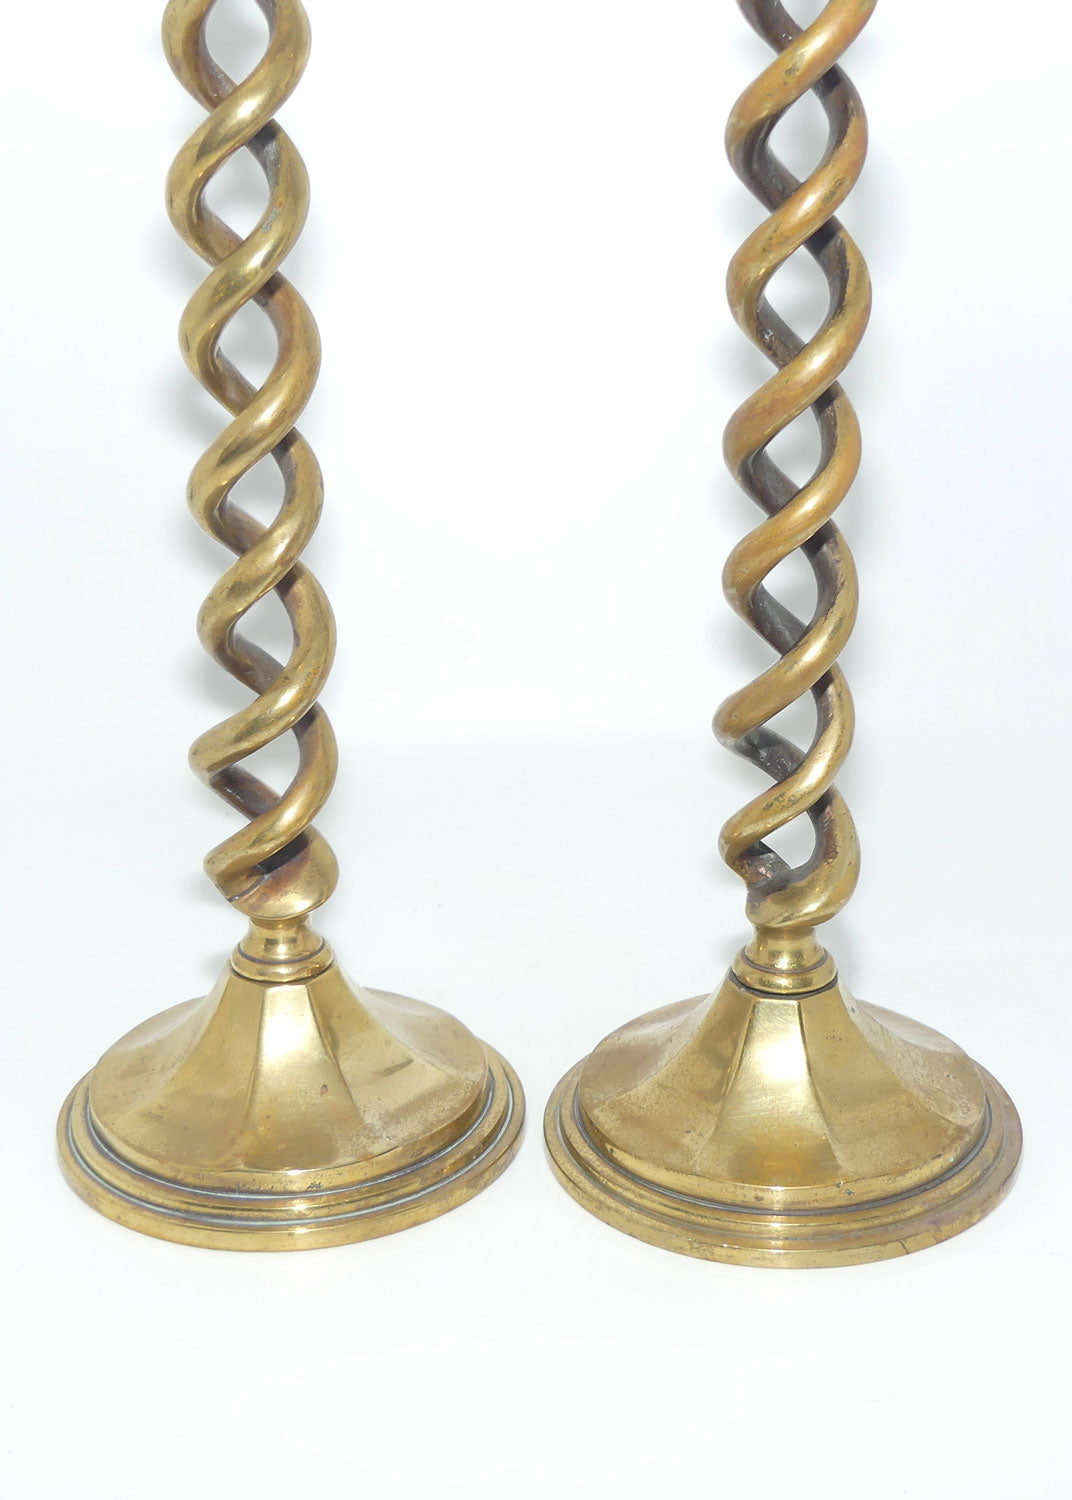 NEW STYLES ADDED! Assorted Pairs of Vintage Brass and Taper